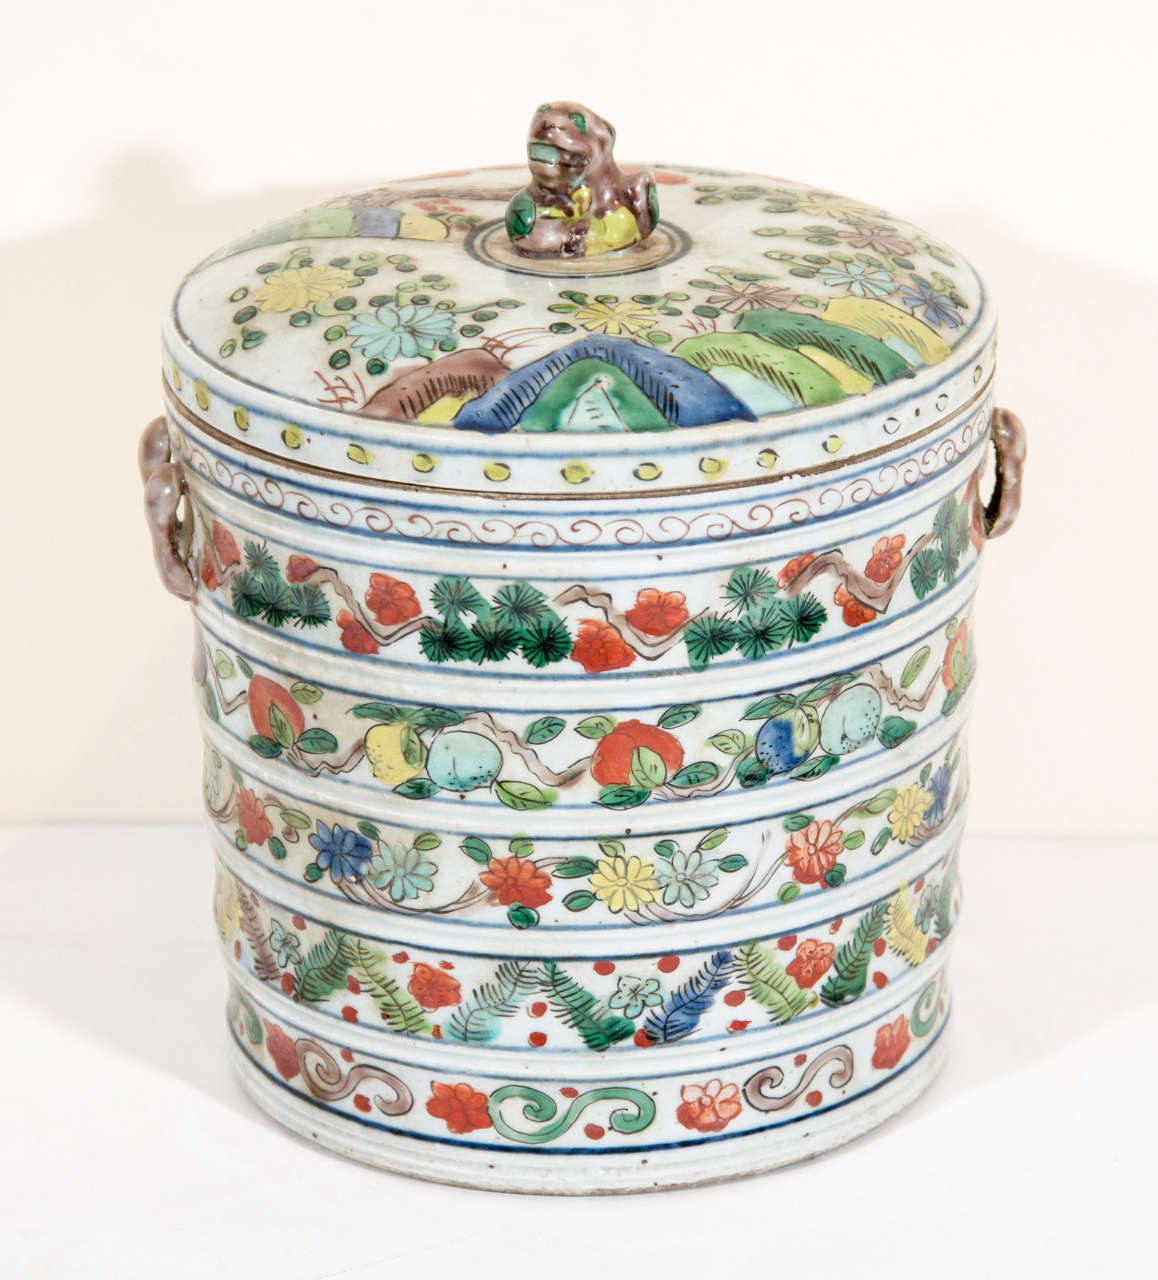 A whimsical, colorful antique Chinese porcelain food container.  From Shanxi Province, c. 1900.
CR530